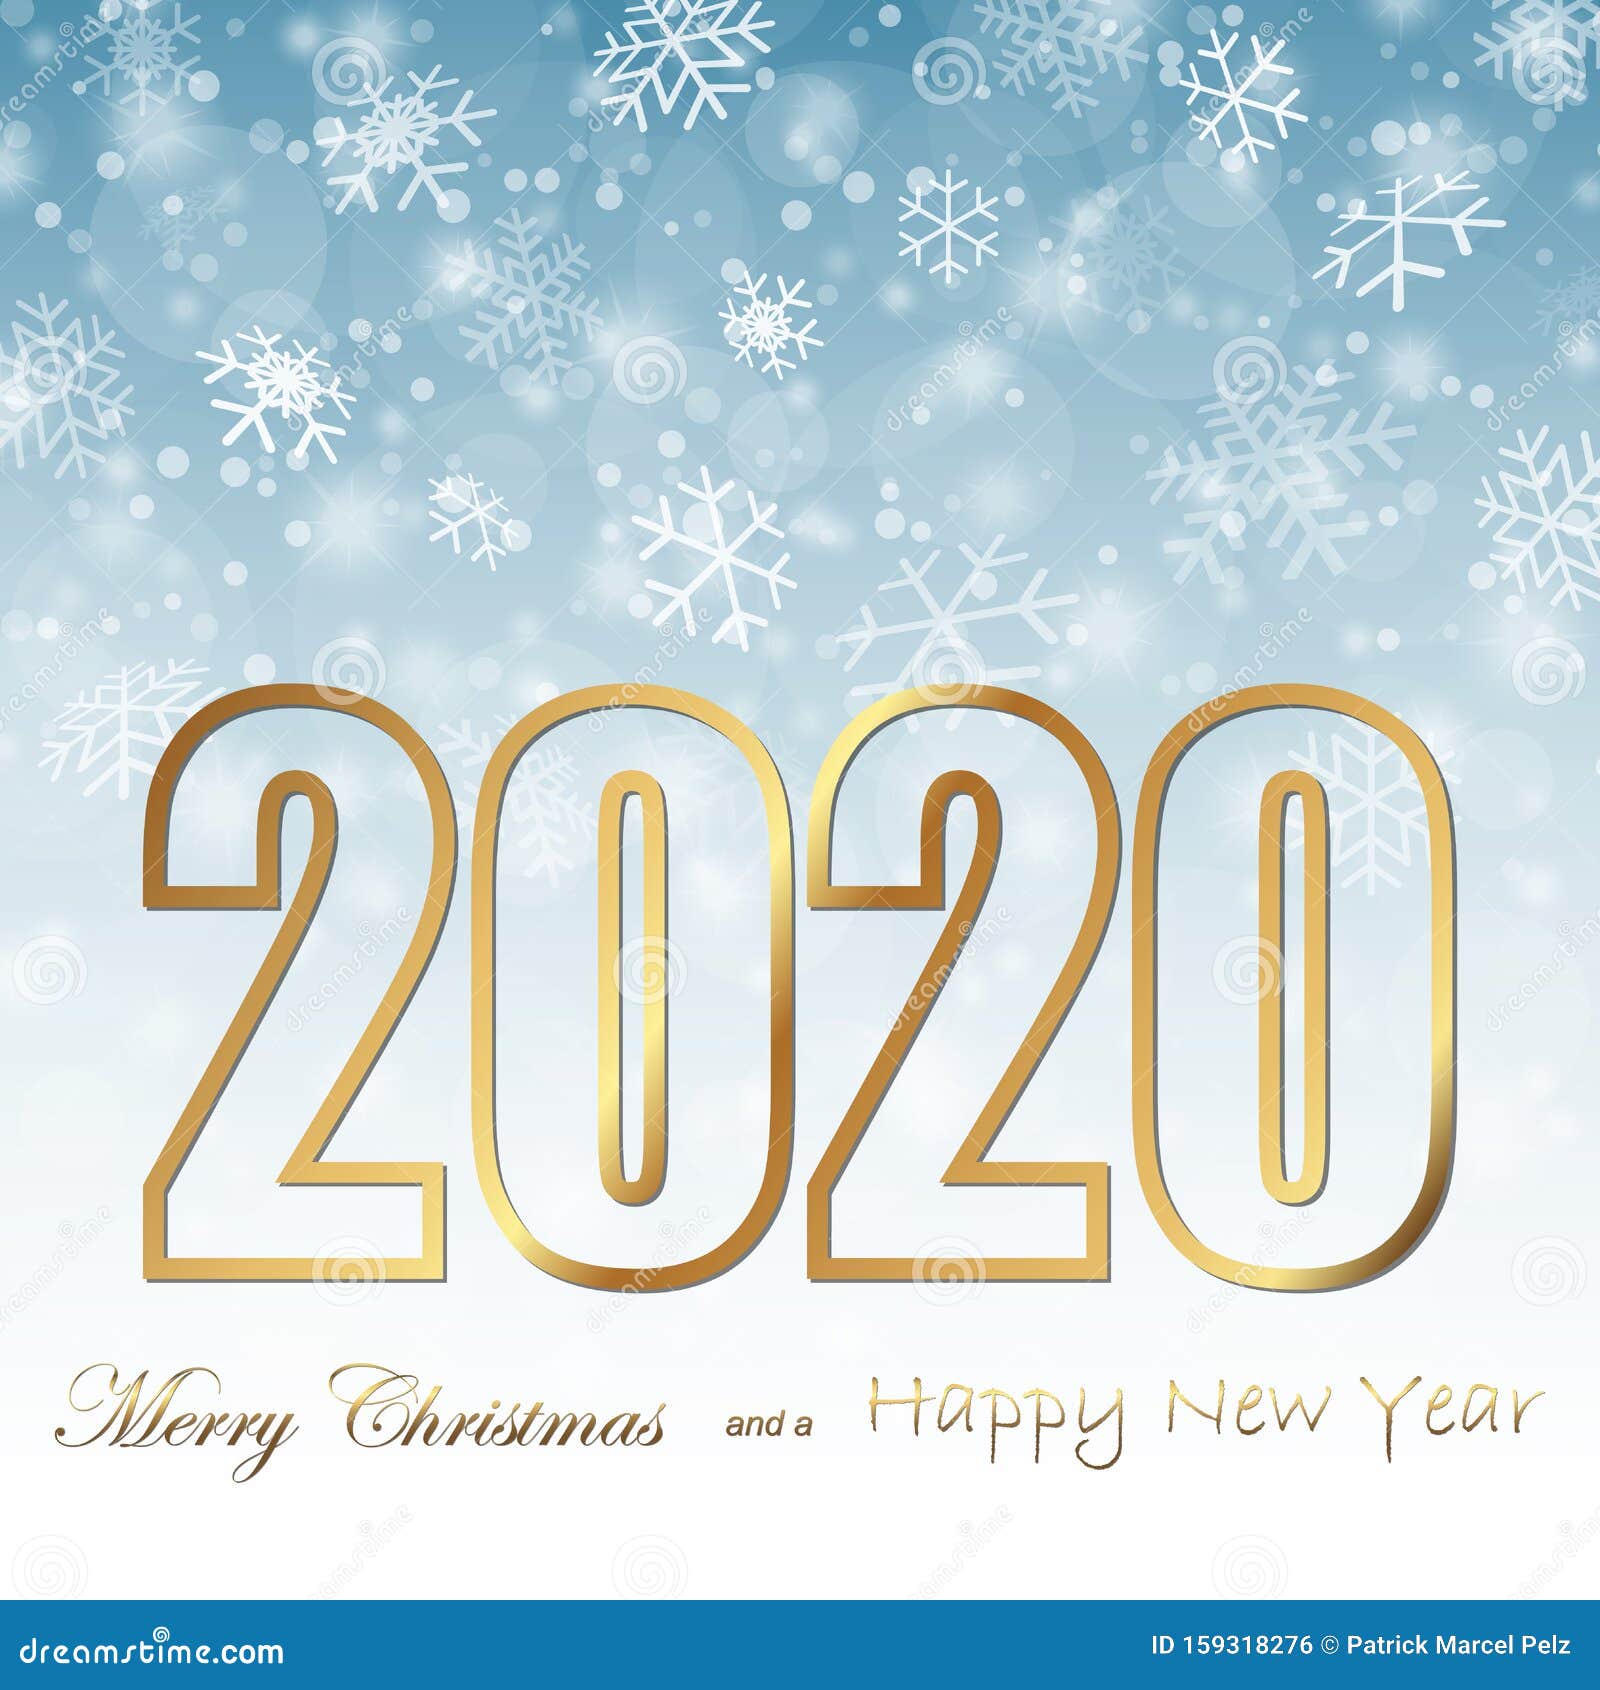 Snow Fall Background For Christmas And New Year 2020 Stock Vector - Illustration of celebration ...